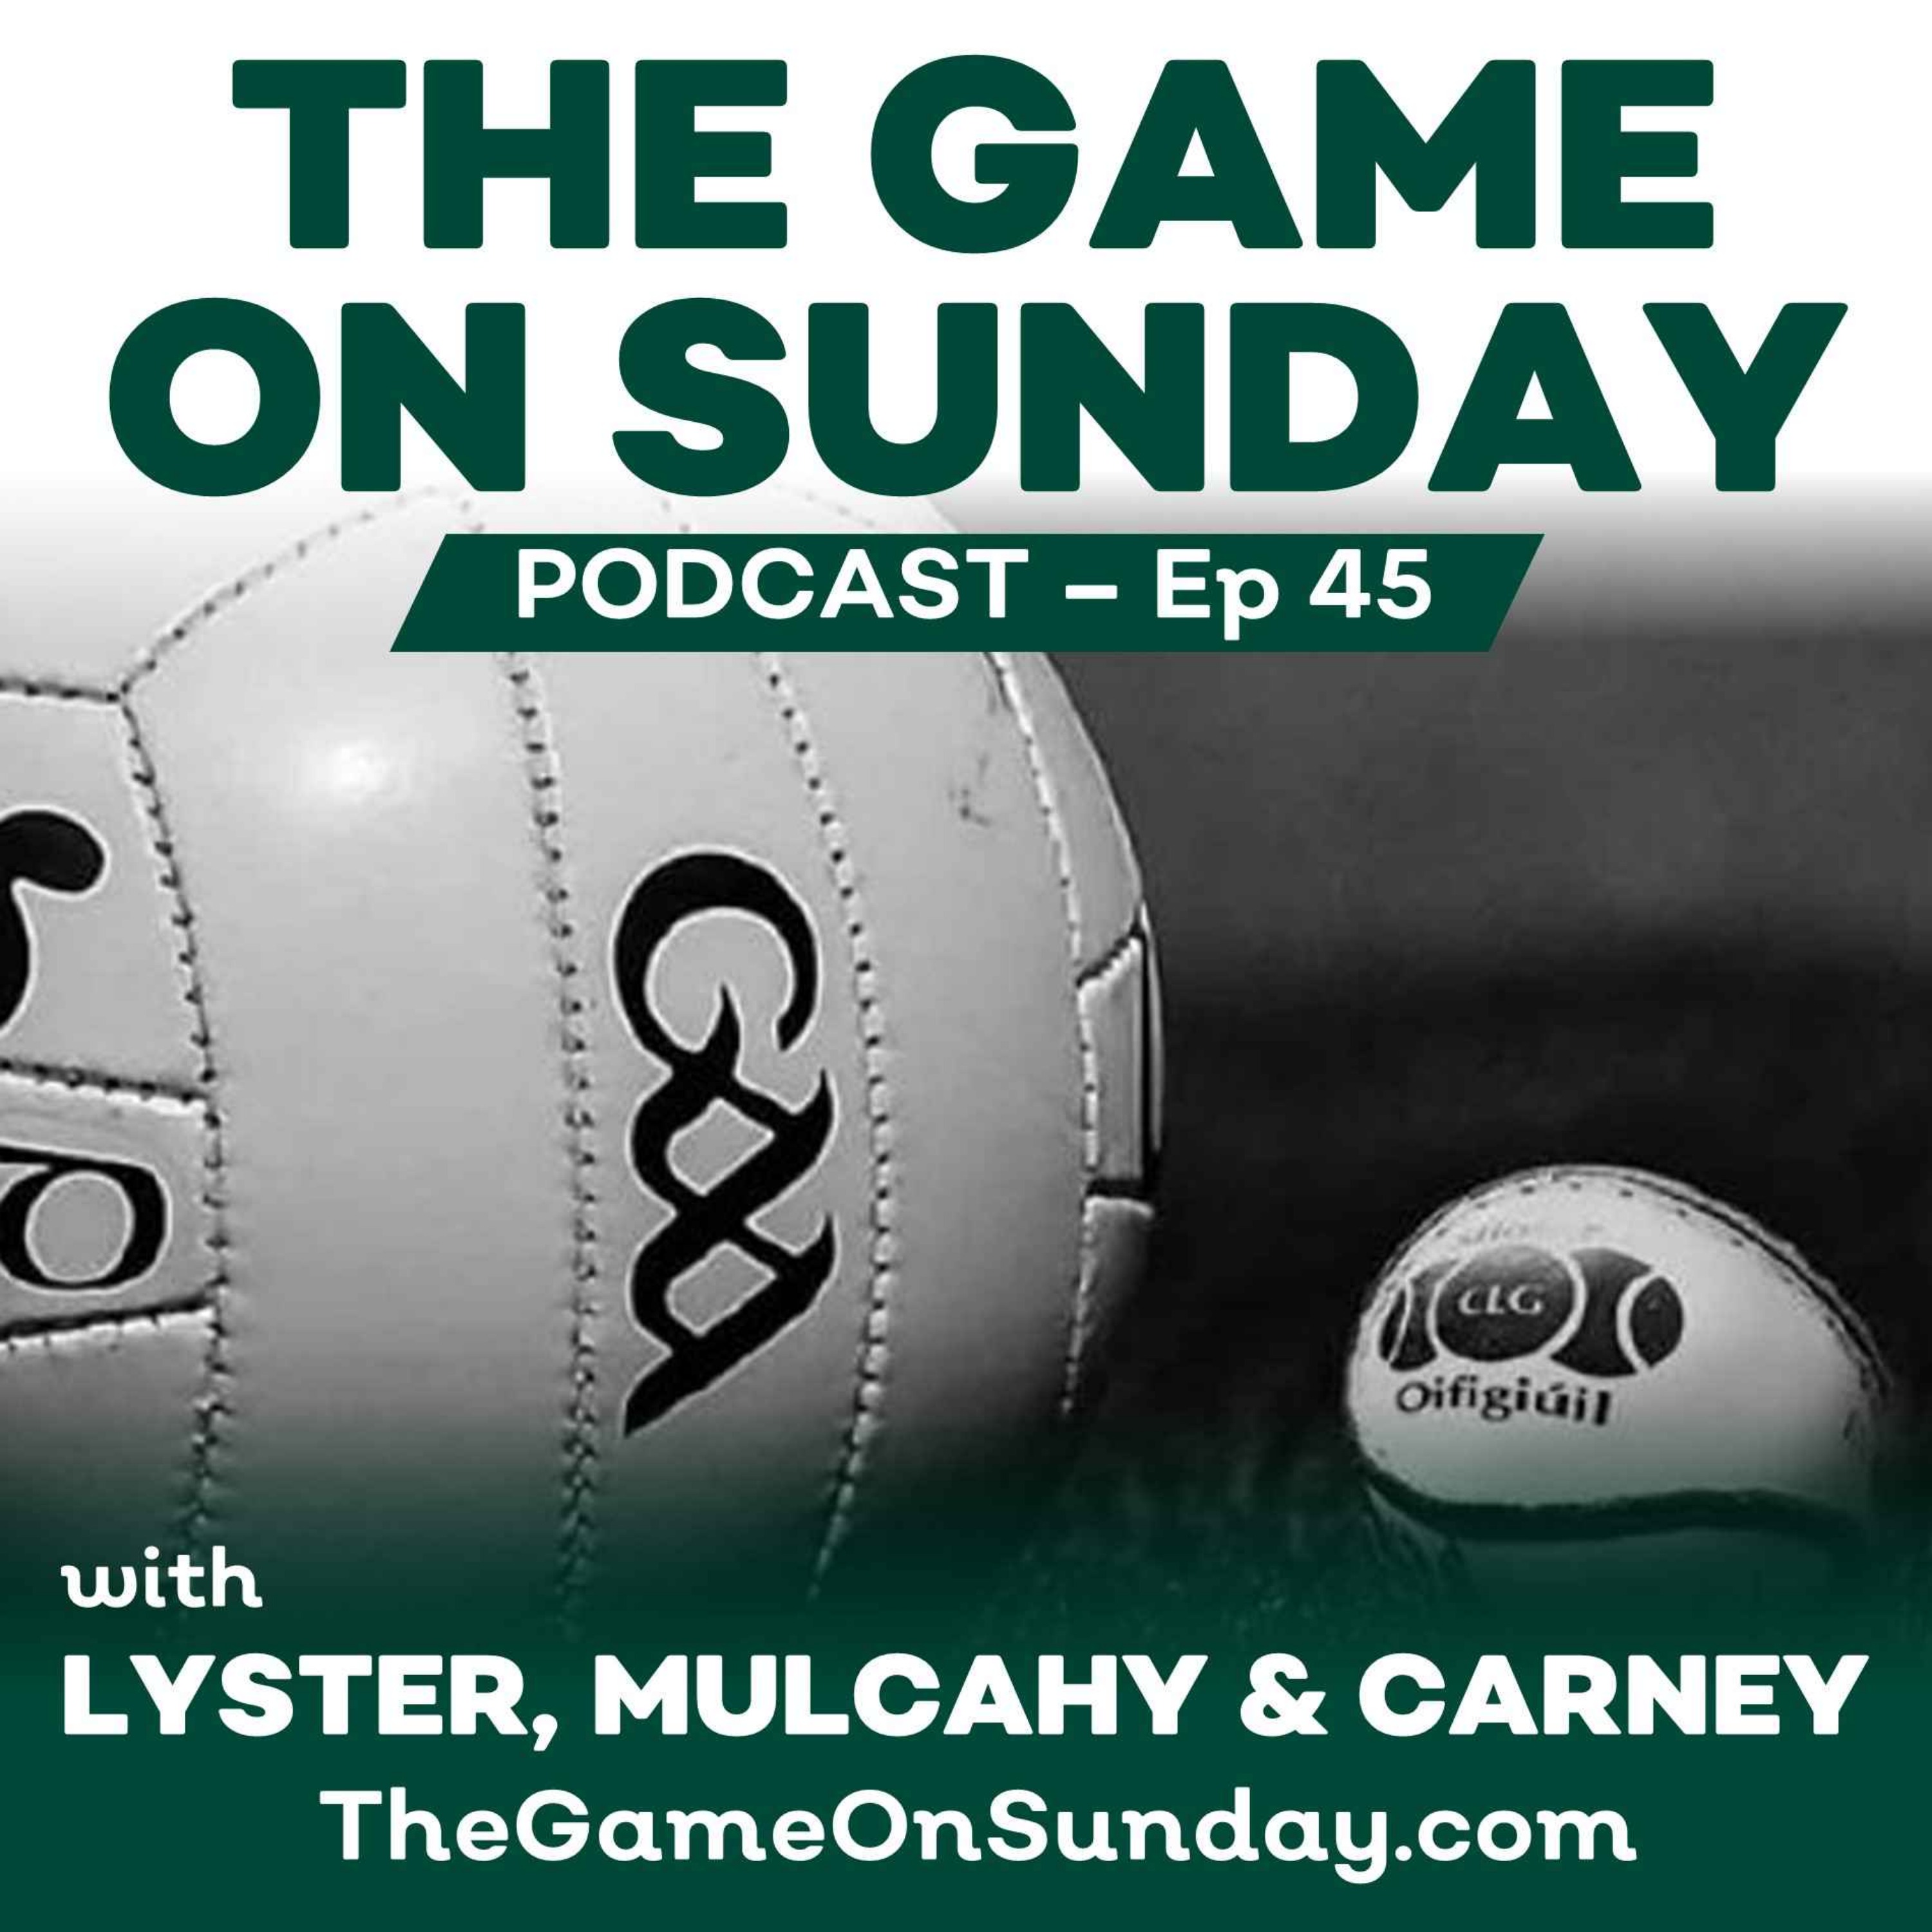 Ep 45 - A Tale of Two Football Games, Hurling and Football Scheduling Dilemma, Wexford's Hurling Hopes, Advocacy for the Ancient Game